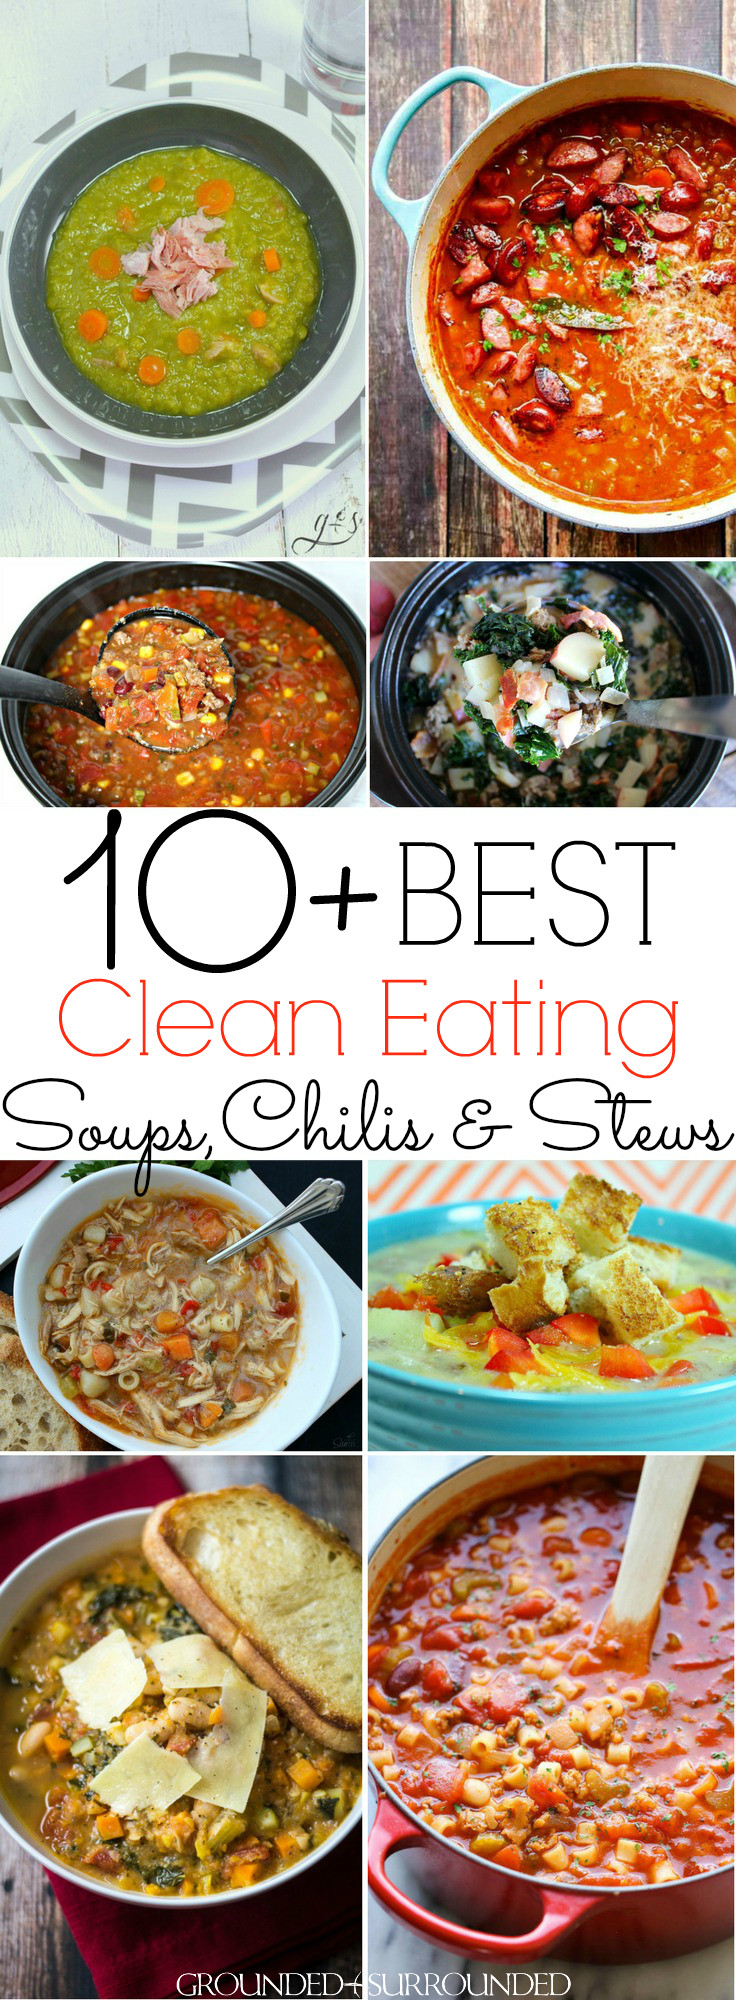 Clean Eating Soup
 10 BEST Clean Eating Soups Chili & Stews